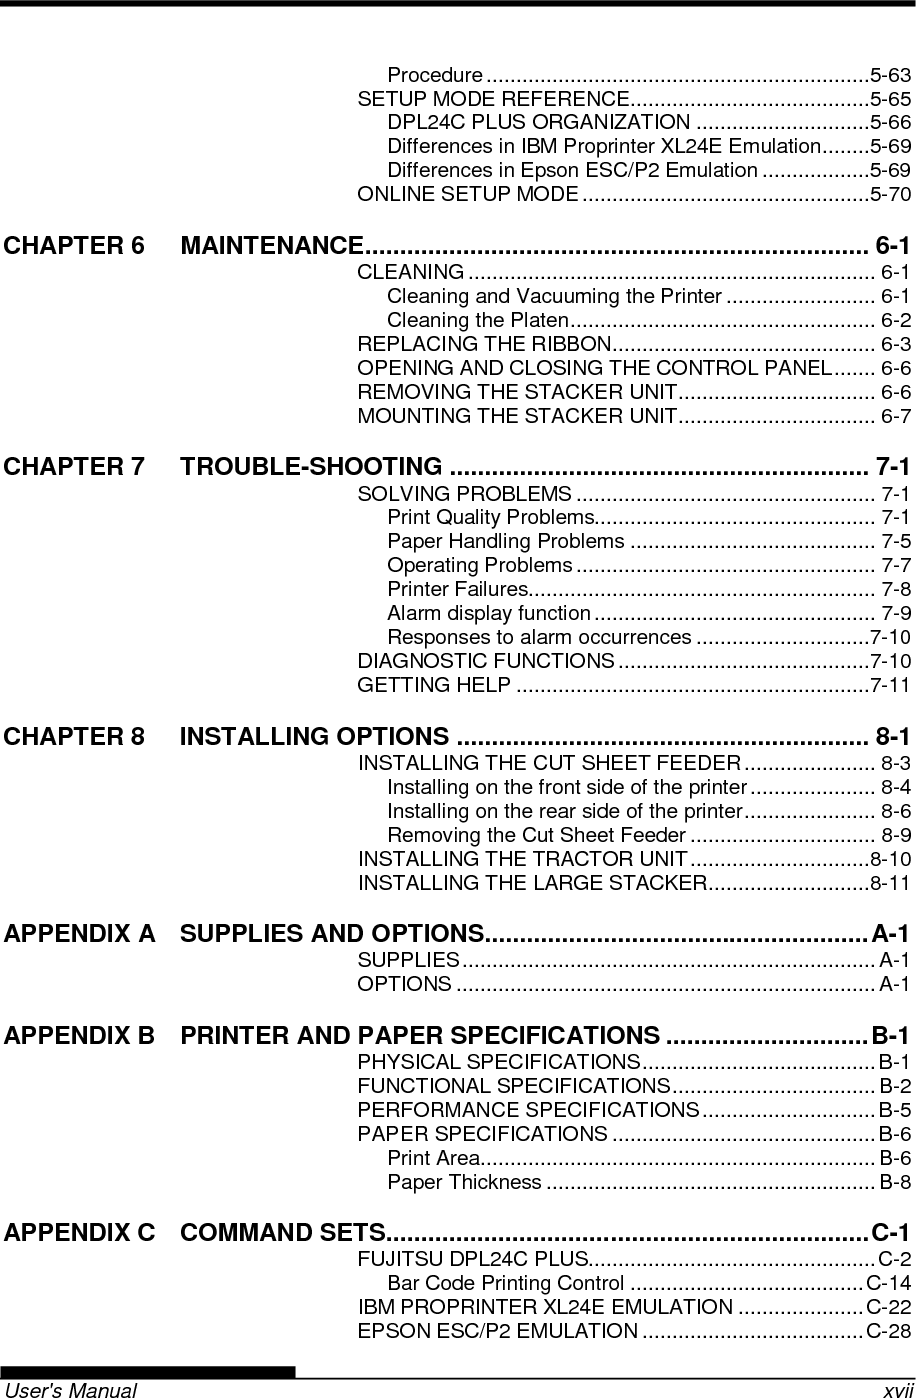   User&apos;s Manual    xvii Procedure ................................................................5-63 SETUP MODE REFERENCE ........................................5-65 DPL24C PLUS ORGANIZATION .............................5-66 Differences in IBM Proprinter XL24E Emulation ........5-69 Differences in Epson ESC/P2 Emulation ..................5-69 ONLINE SETUP MODE ................................................5-70 CHAPTER 6 MAINTENANCE ........................................................................ 6-1 CLEANING .................................................................... 6-1 Cleaning and Vacuuming the Printer ......................... 6-1 Cleaning the Platen ................................................... 6-2 REPLACING THE RIBBON ............................................ 6-3 OPENING AND CLOSING THE CONTROL PANEL ....... 6-6 REMOVING THE STACKER UNIT ................................. 6-6 MOUNTING THE STACKER UNIT ................................. 6-7 CHAPTER 7 TROUBLE-SHOOTING ............................................................ 7-1 SOLVING PROBLEMS .................................................. 7-1 Print Quality Problems............................................... 7-1 Paper Handling Problems ......................................... 7-5 Operating Problems .................................................. 7-7 Printer Failures.......................................................... 7-8 Alarm display function ............................................... 7-9 Responses to alarm occurrences .............................7-10 DIAGNOSTIC FUNCTIONS ..........................................7-10 GETTING HELP ...........................................................7-11 CHAPTER 8 INSTALLING OPTIONS ........................................................... 8-1 INSTALLING THE CUT SHEET FEEDER ...................... 8-3 Installing on the front side of the printer ..................... 8-4 Installing on the rear side of the printer ...................... 8-6 Removing the Cut Sheet Feeder ............................... 8-9 INSTALLING THE TRACTOR UNIT ..............................8-10 INSTALLING THE LARGE STACKER ...........................8-11 APPENDIX A SUPPLIES AND OPTIONS....................................................... A-1 SUPPLIES ..................................................................... A-1 OPTIONS ...................................................................... A-1 APPENDIX B PRINTER AND PAPER SPECIFICATIONS ............................. B-1 PHYSICAL SPECIFICATIONS ....................................... B-1 FUNCTIONAL SPECIFICATIONS .................................. B-2 PERFORMANCE SPECIFICATIONS ............................. B-5 PAPER SPECIFICATIONS ............................................ B-6 Print Area .................................................................. B-6 Paper Thickness ....................................................... B-8 APPENDIX C COMMAND SETS ..................................................................... C-1 FUJITSU DPL24C PLUS................................................ C-2 Bar Code Printing Control ....................................... C-14 IBM PROPRINTER XL24E EMULATION ..................... C-22 EPSON ESC/P2 EMULATION ..................................... C-28 